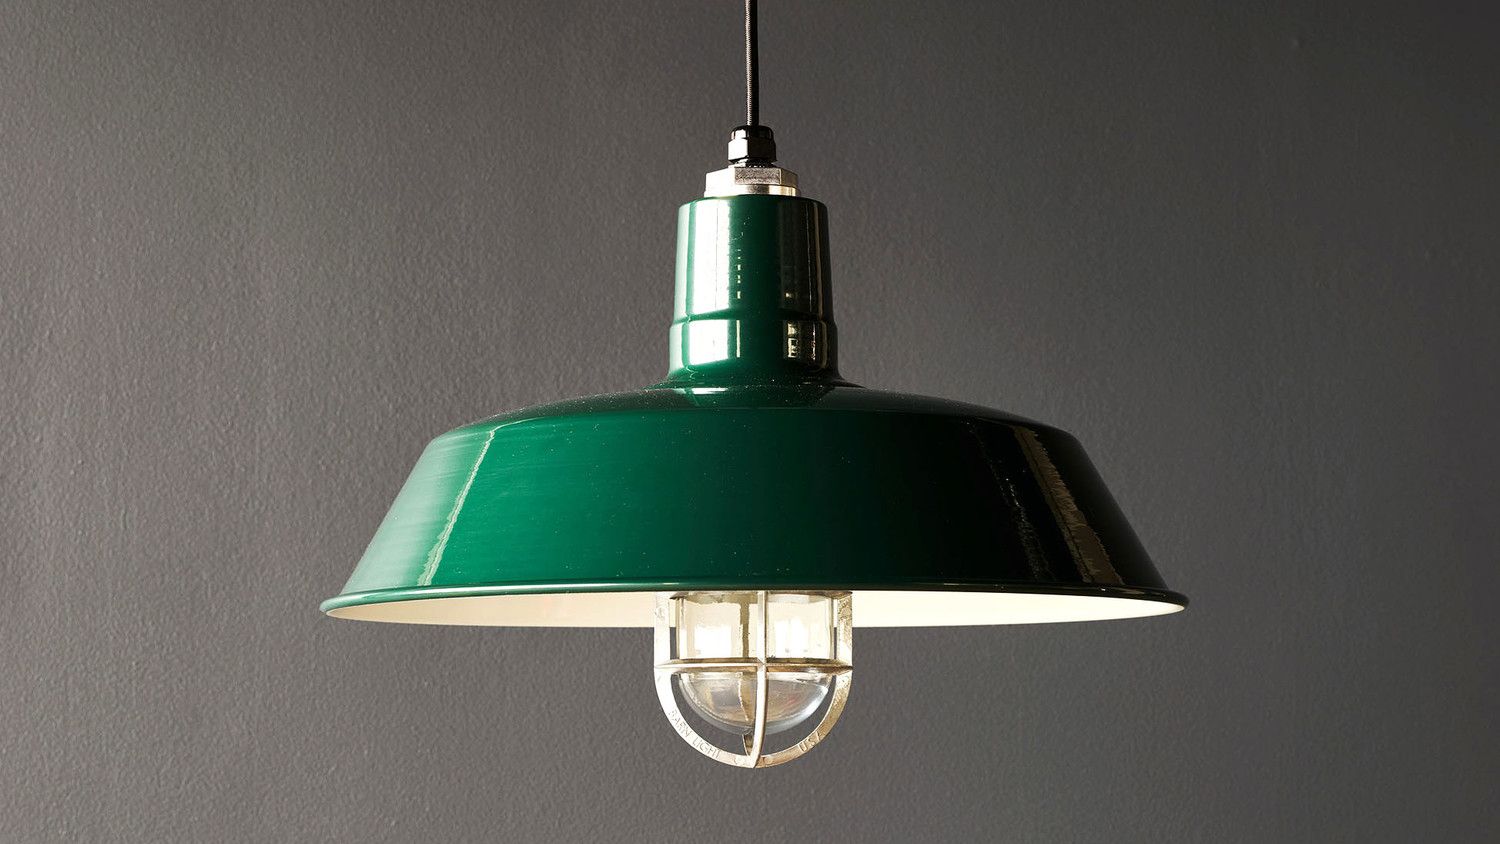 Here's A Great Deal On Chauvin 3 Light Lantern Geometric Pendant With Regard To Chauvin 3 Light Lantern Geometric Pendants (View 17 of 30)